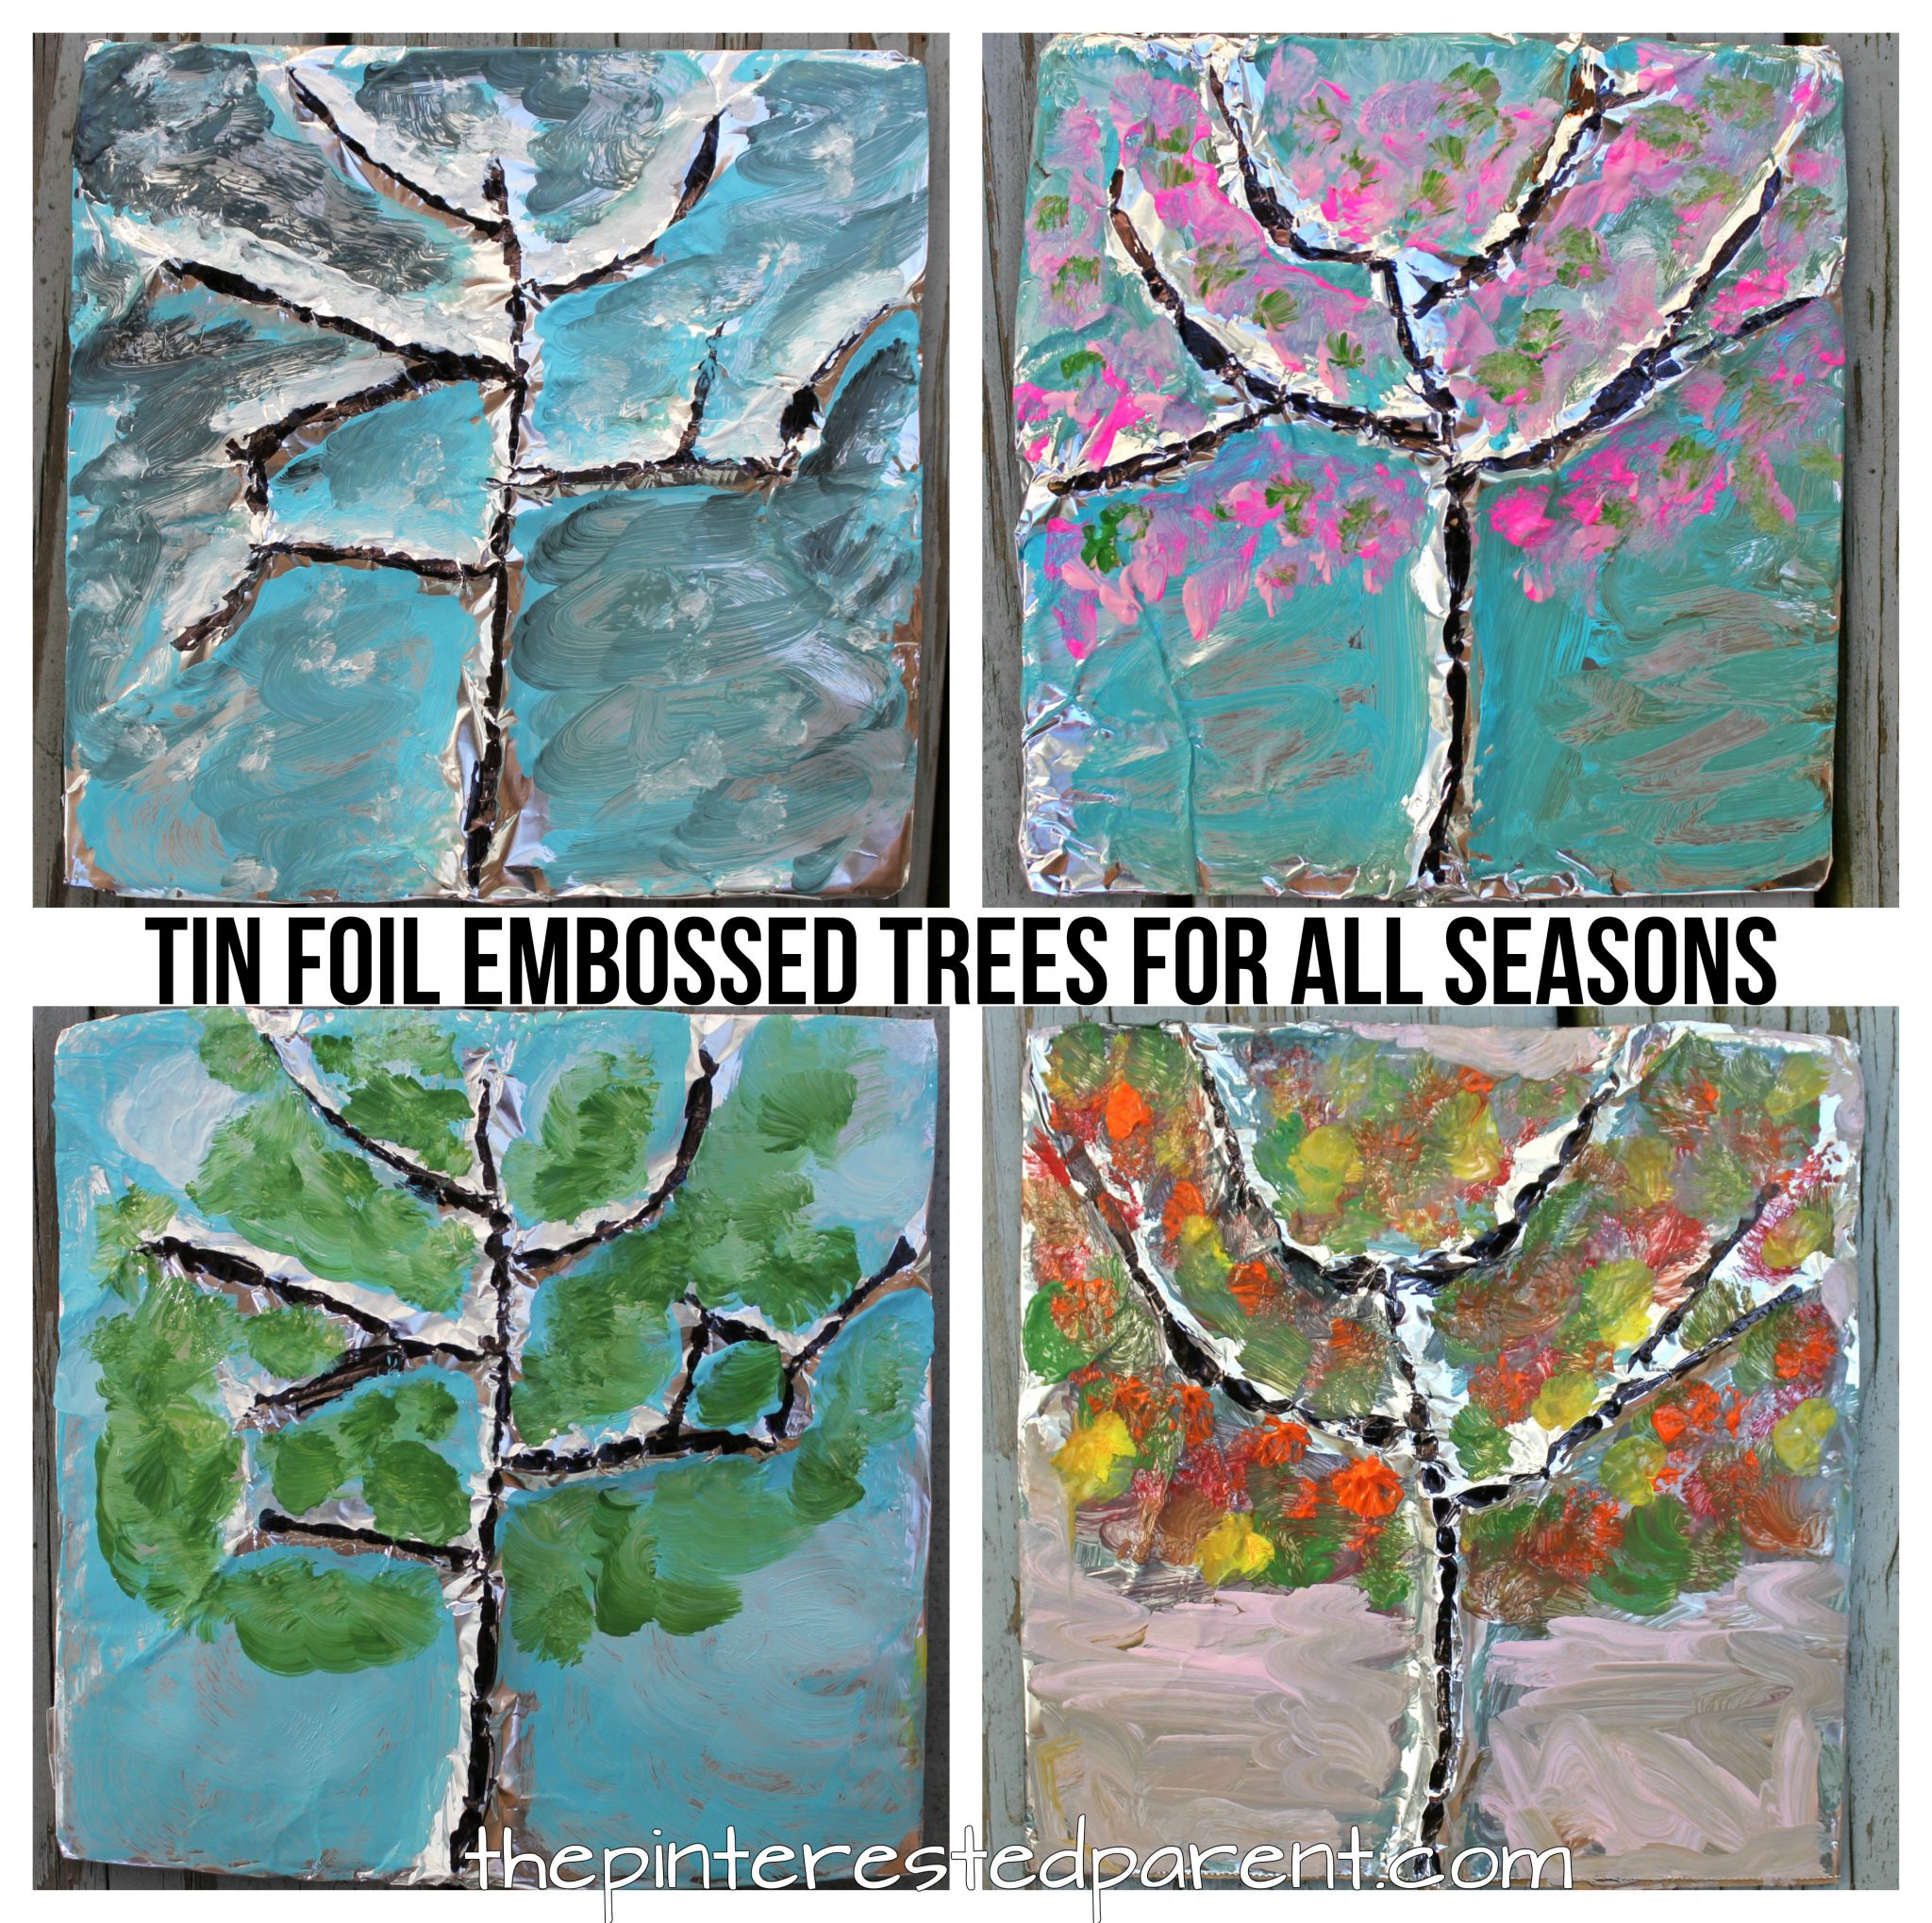 Tin foil embossed painted trees for all seasons. Make winter, spring, summer and fall trees using nature, aluminum foil and paint. Arts and crafts for kids